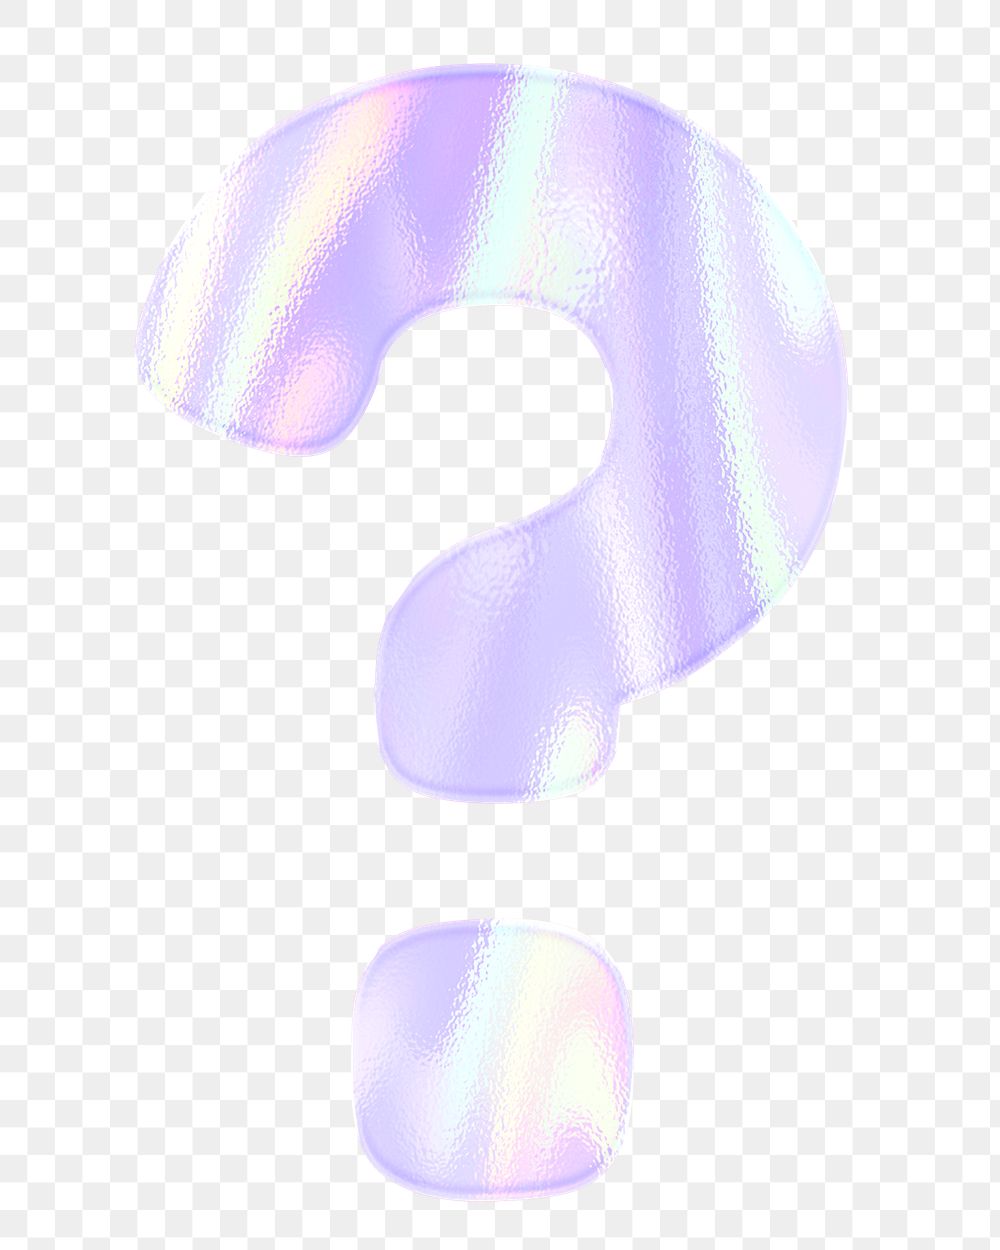 Shiny question mark sticker png holographic pastel purple